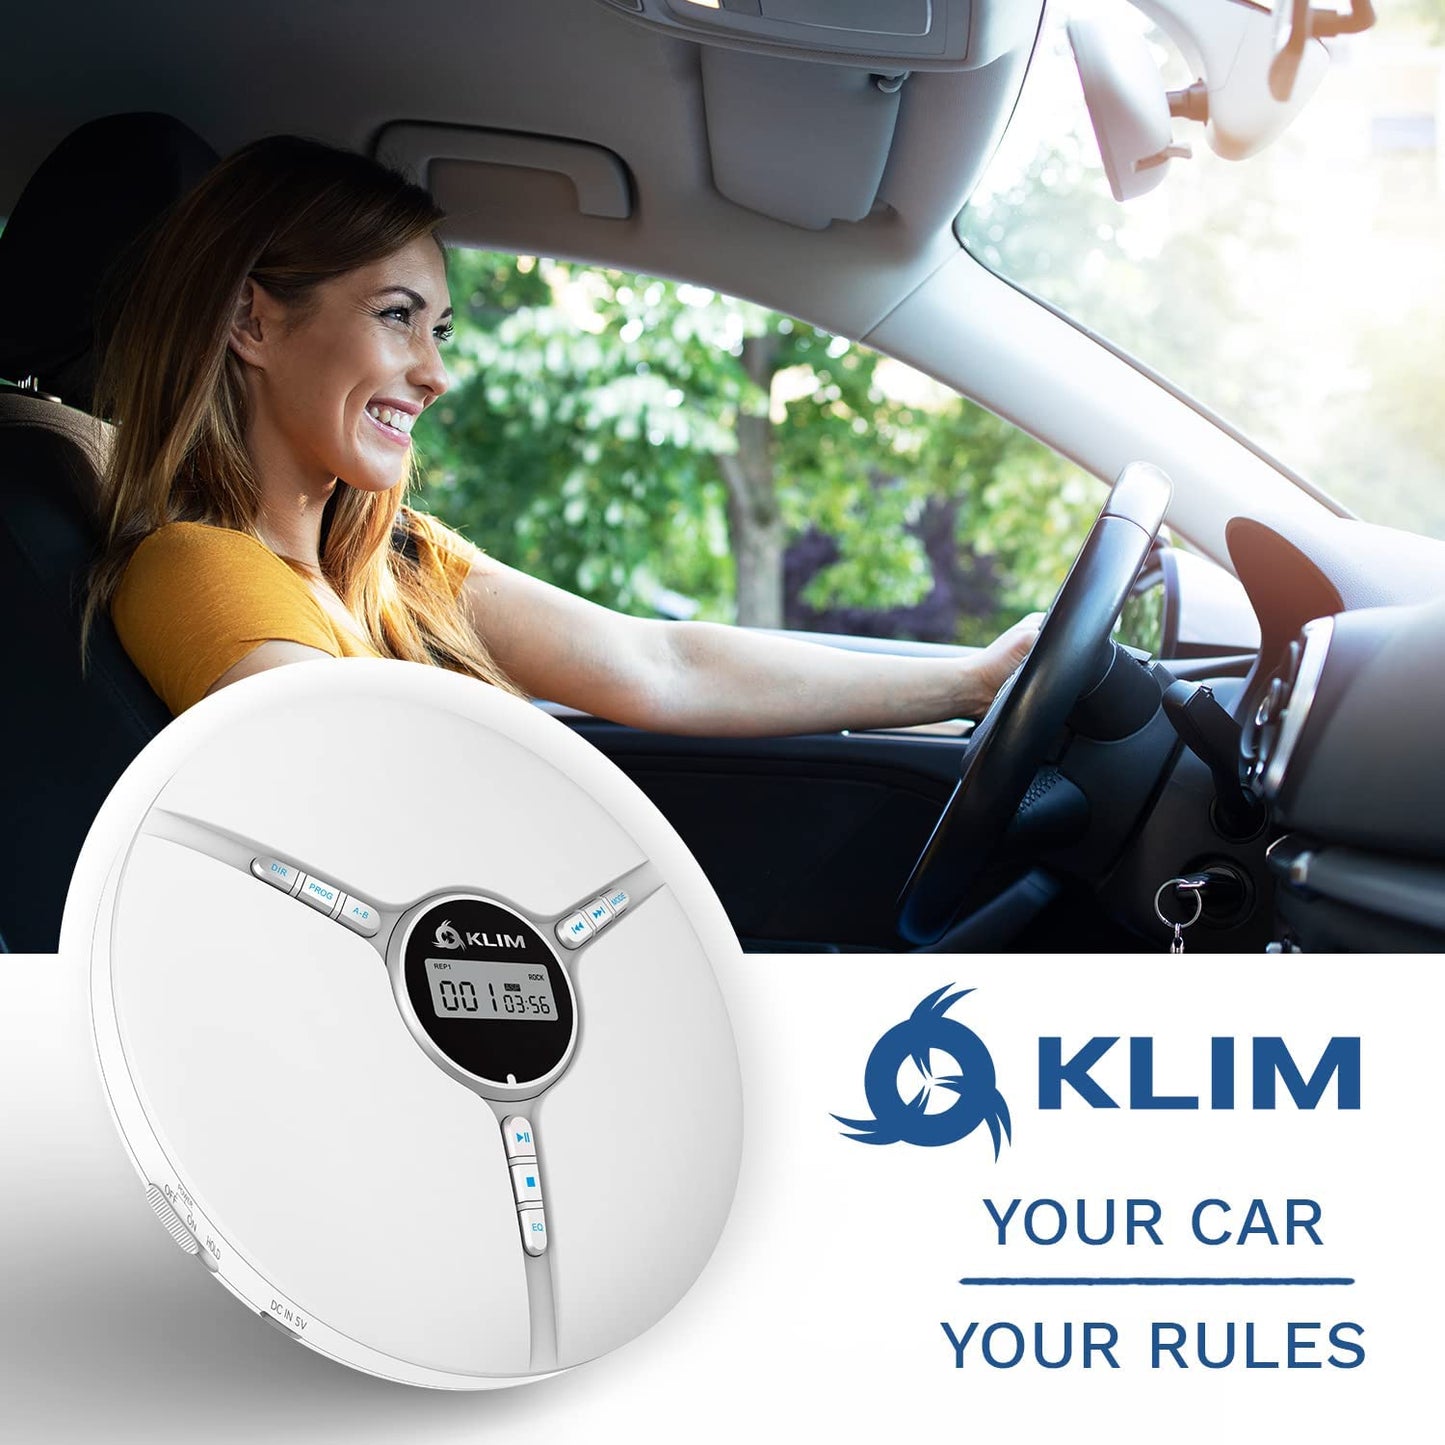 KLIM Discman Portable CD Player with a Built-in Battery - New 2023 Version + Ideal Car CD Player with Earphones + Compatible CD-R, CD-RW, MP3. Compact Mini CD Players Personal CD Walkman - White